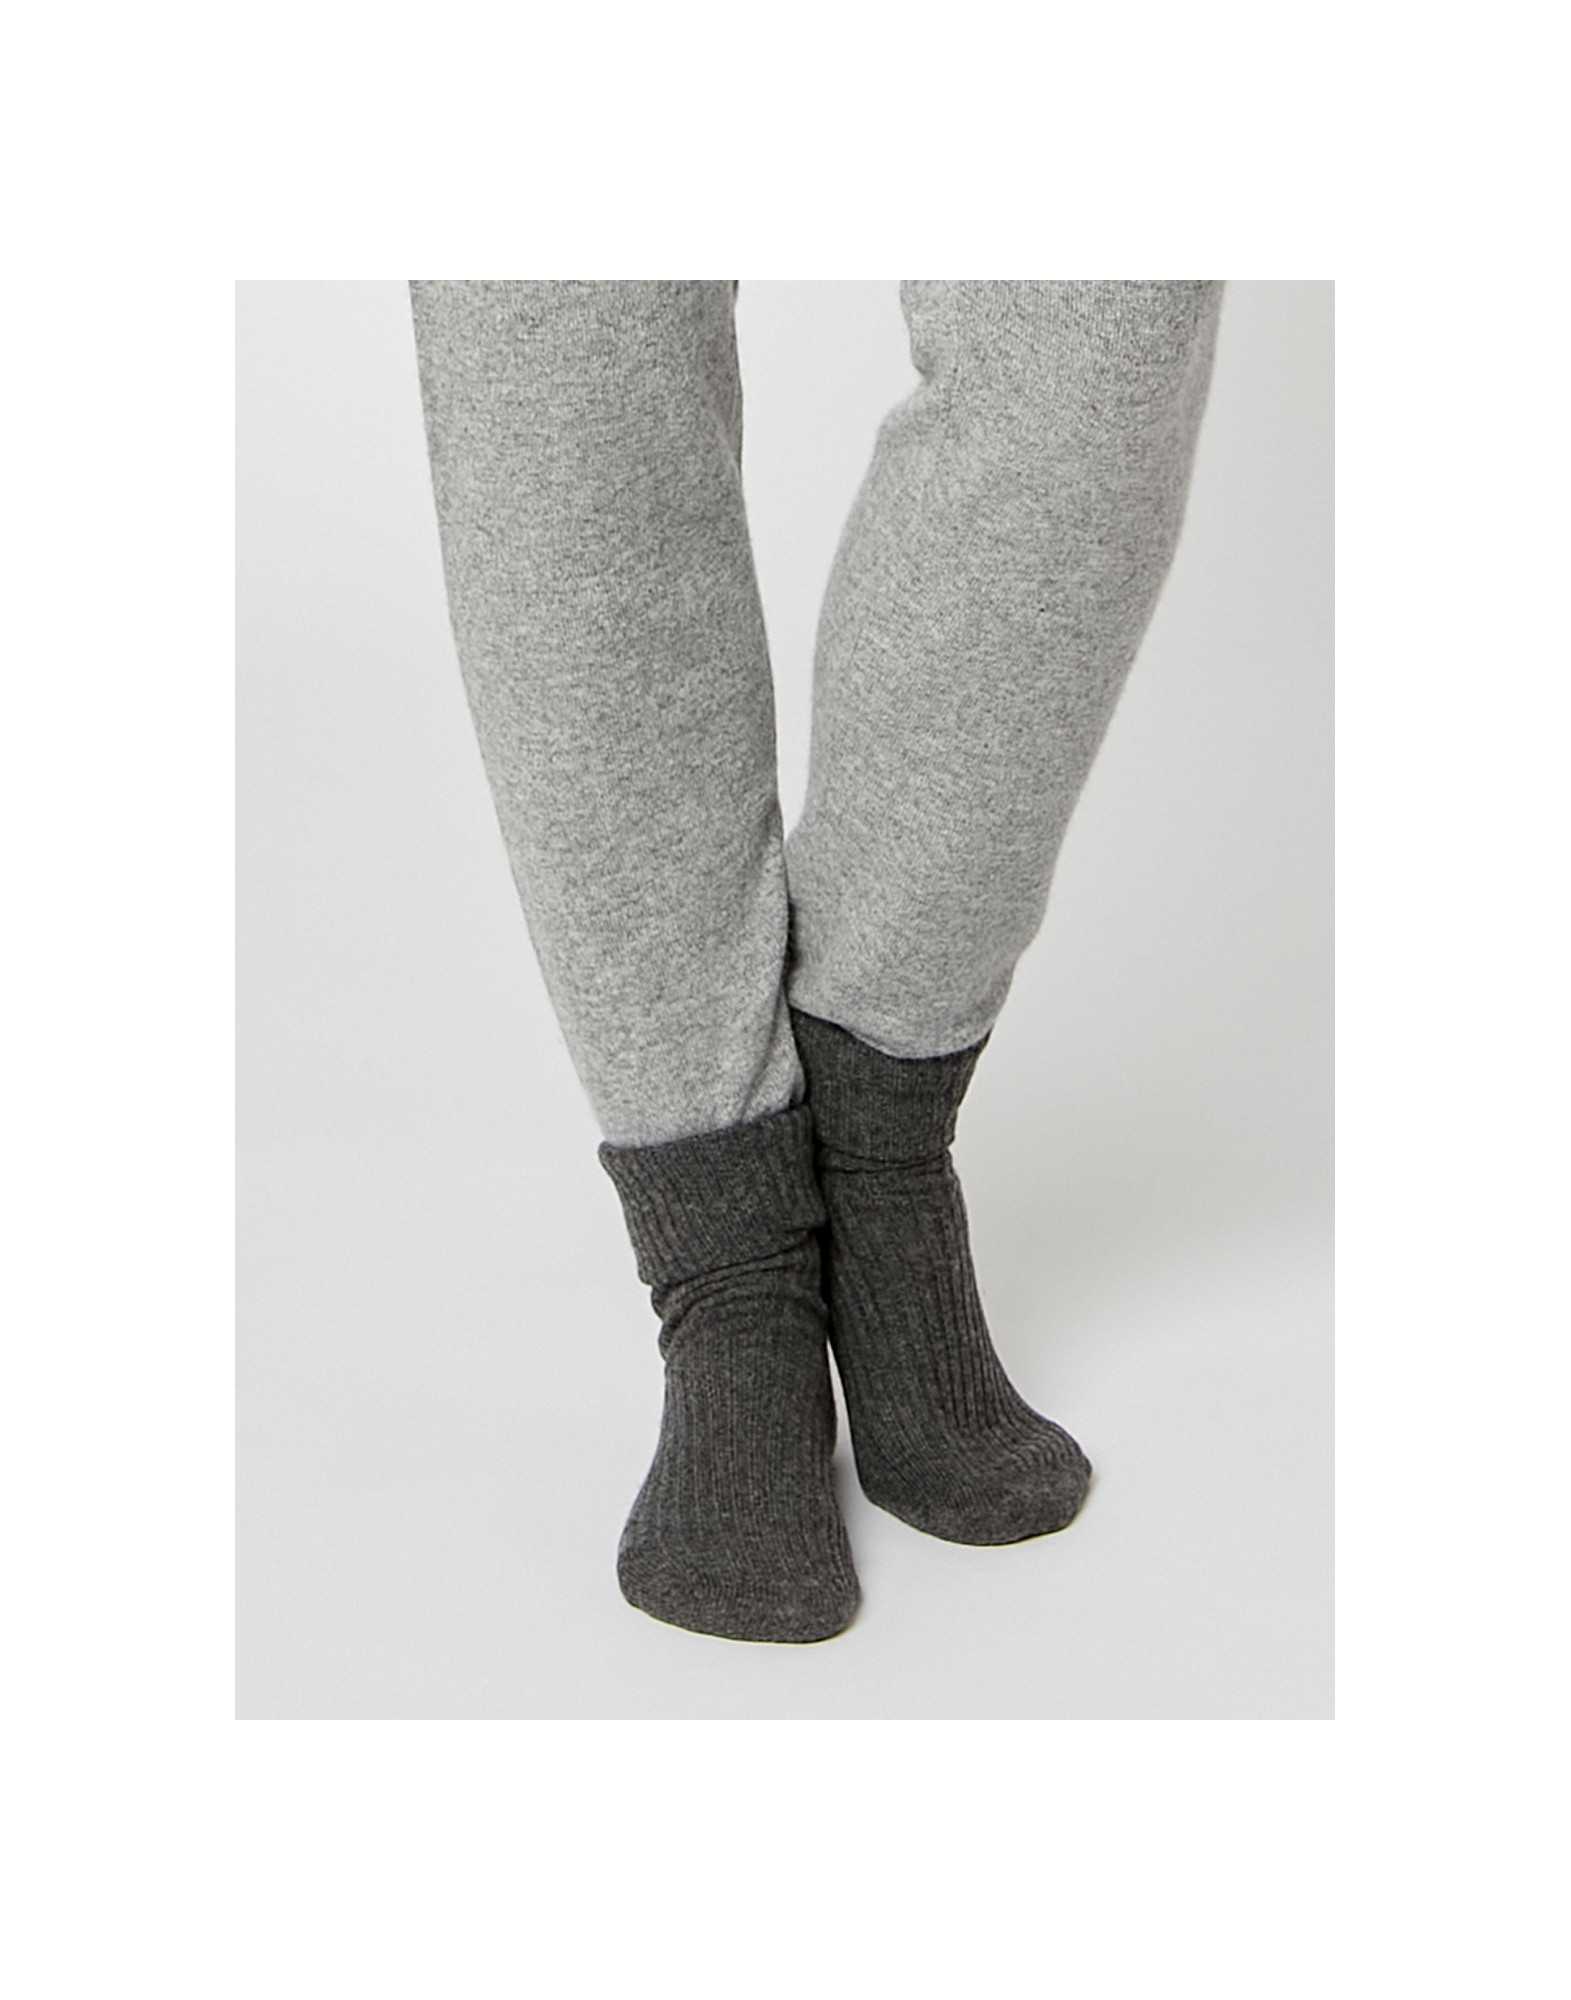 Cashemere socks CACHE 014 in slate grey - Lingerie le Chat